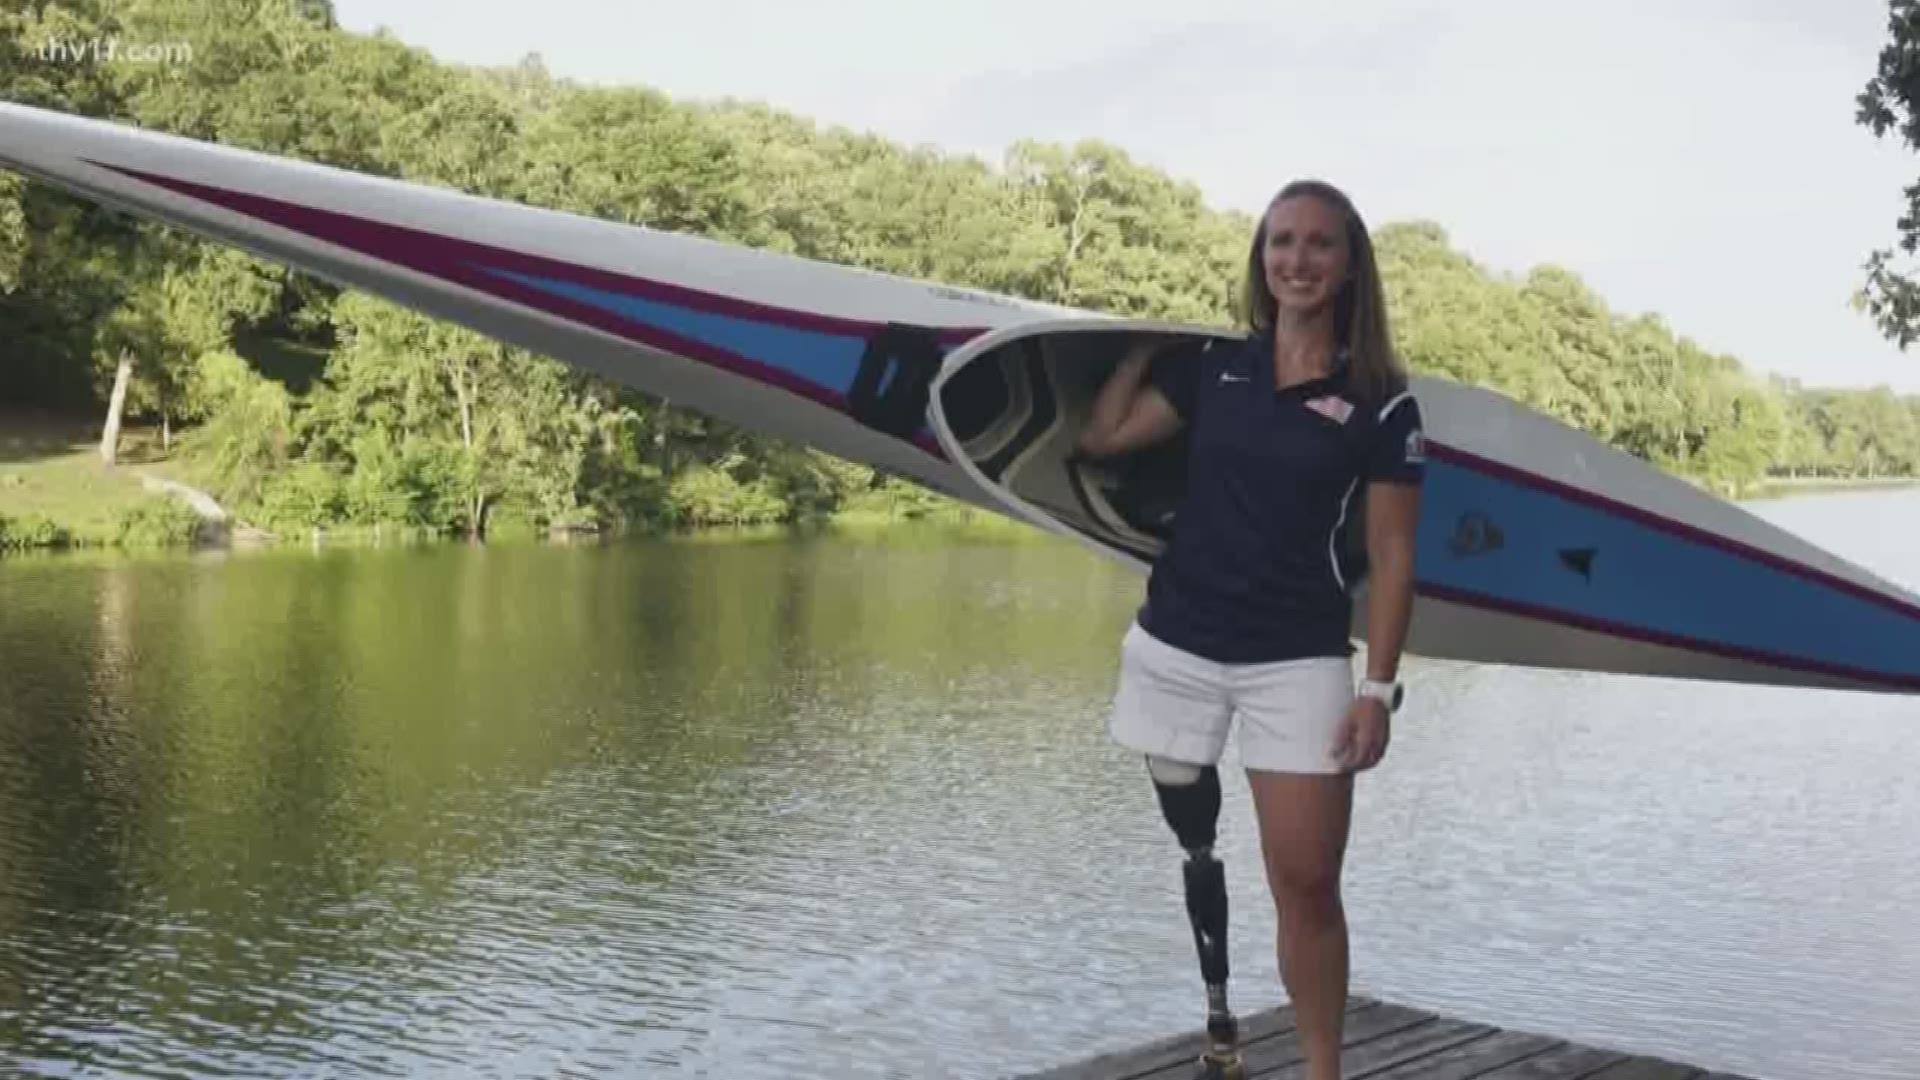 The story of one Arkansas woman's journey to the Paralympics shows us why anything is possible.